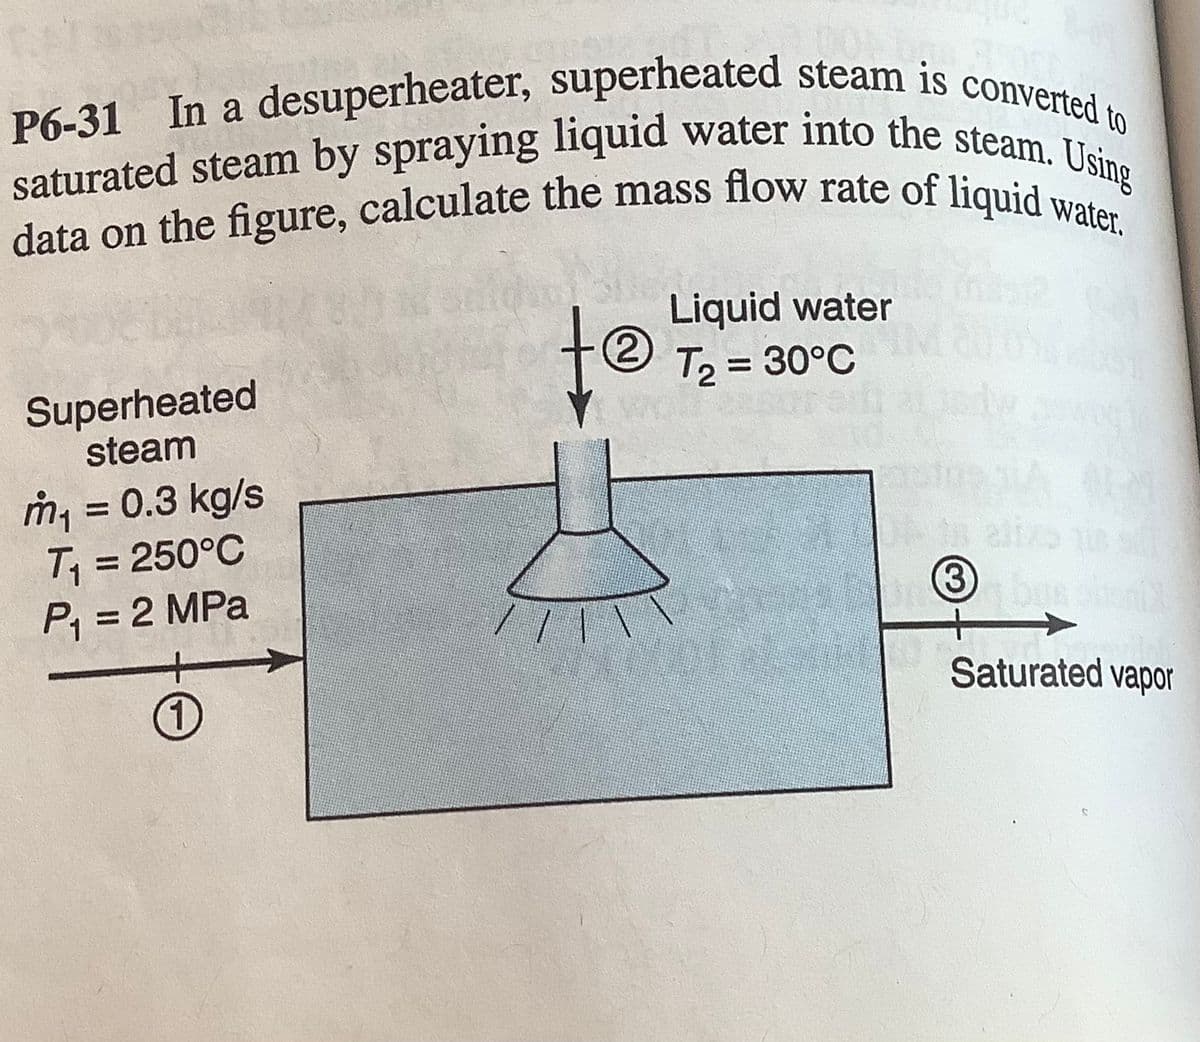 converted
to
P6-31 In a desuperheater, superheated steam is
saturated steam by spraying liquid water into the steam. Using
data on the figure, calculate the mass flow rate of liquid water.
Superheated
steam
m₁ = 0.3 kg/s
T₁ = 250°C
P₁ = 2 MPa
+
1
(2)
Liquid water
T₂ = 30°C
3
11:00
Saturated vapor